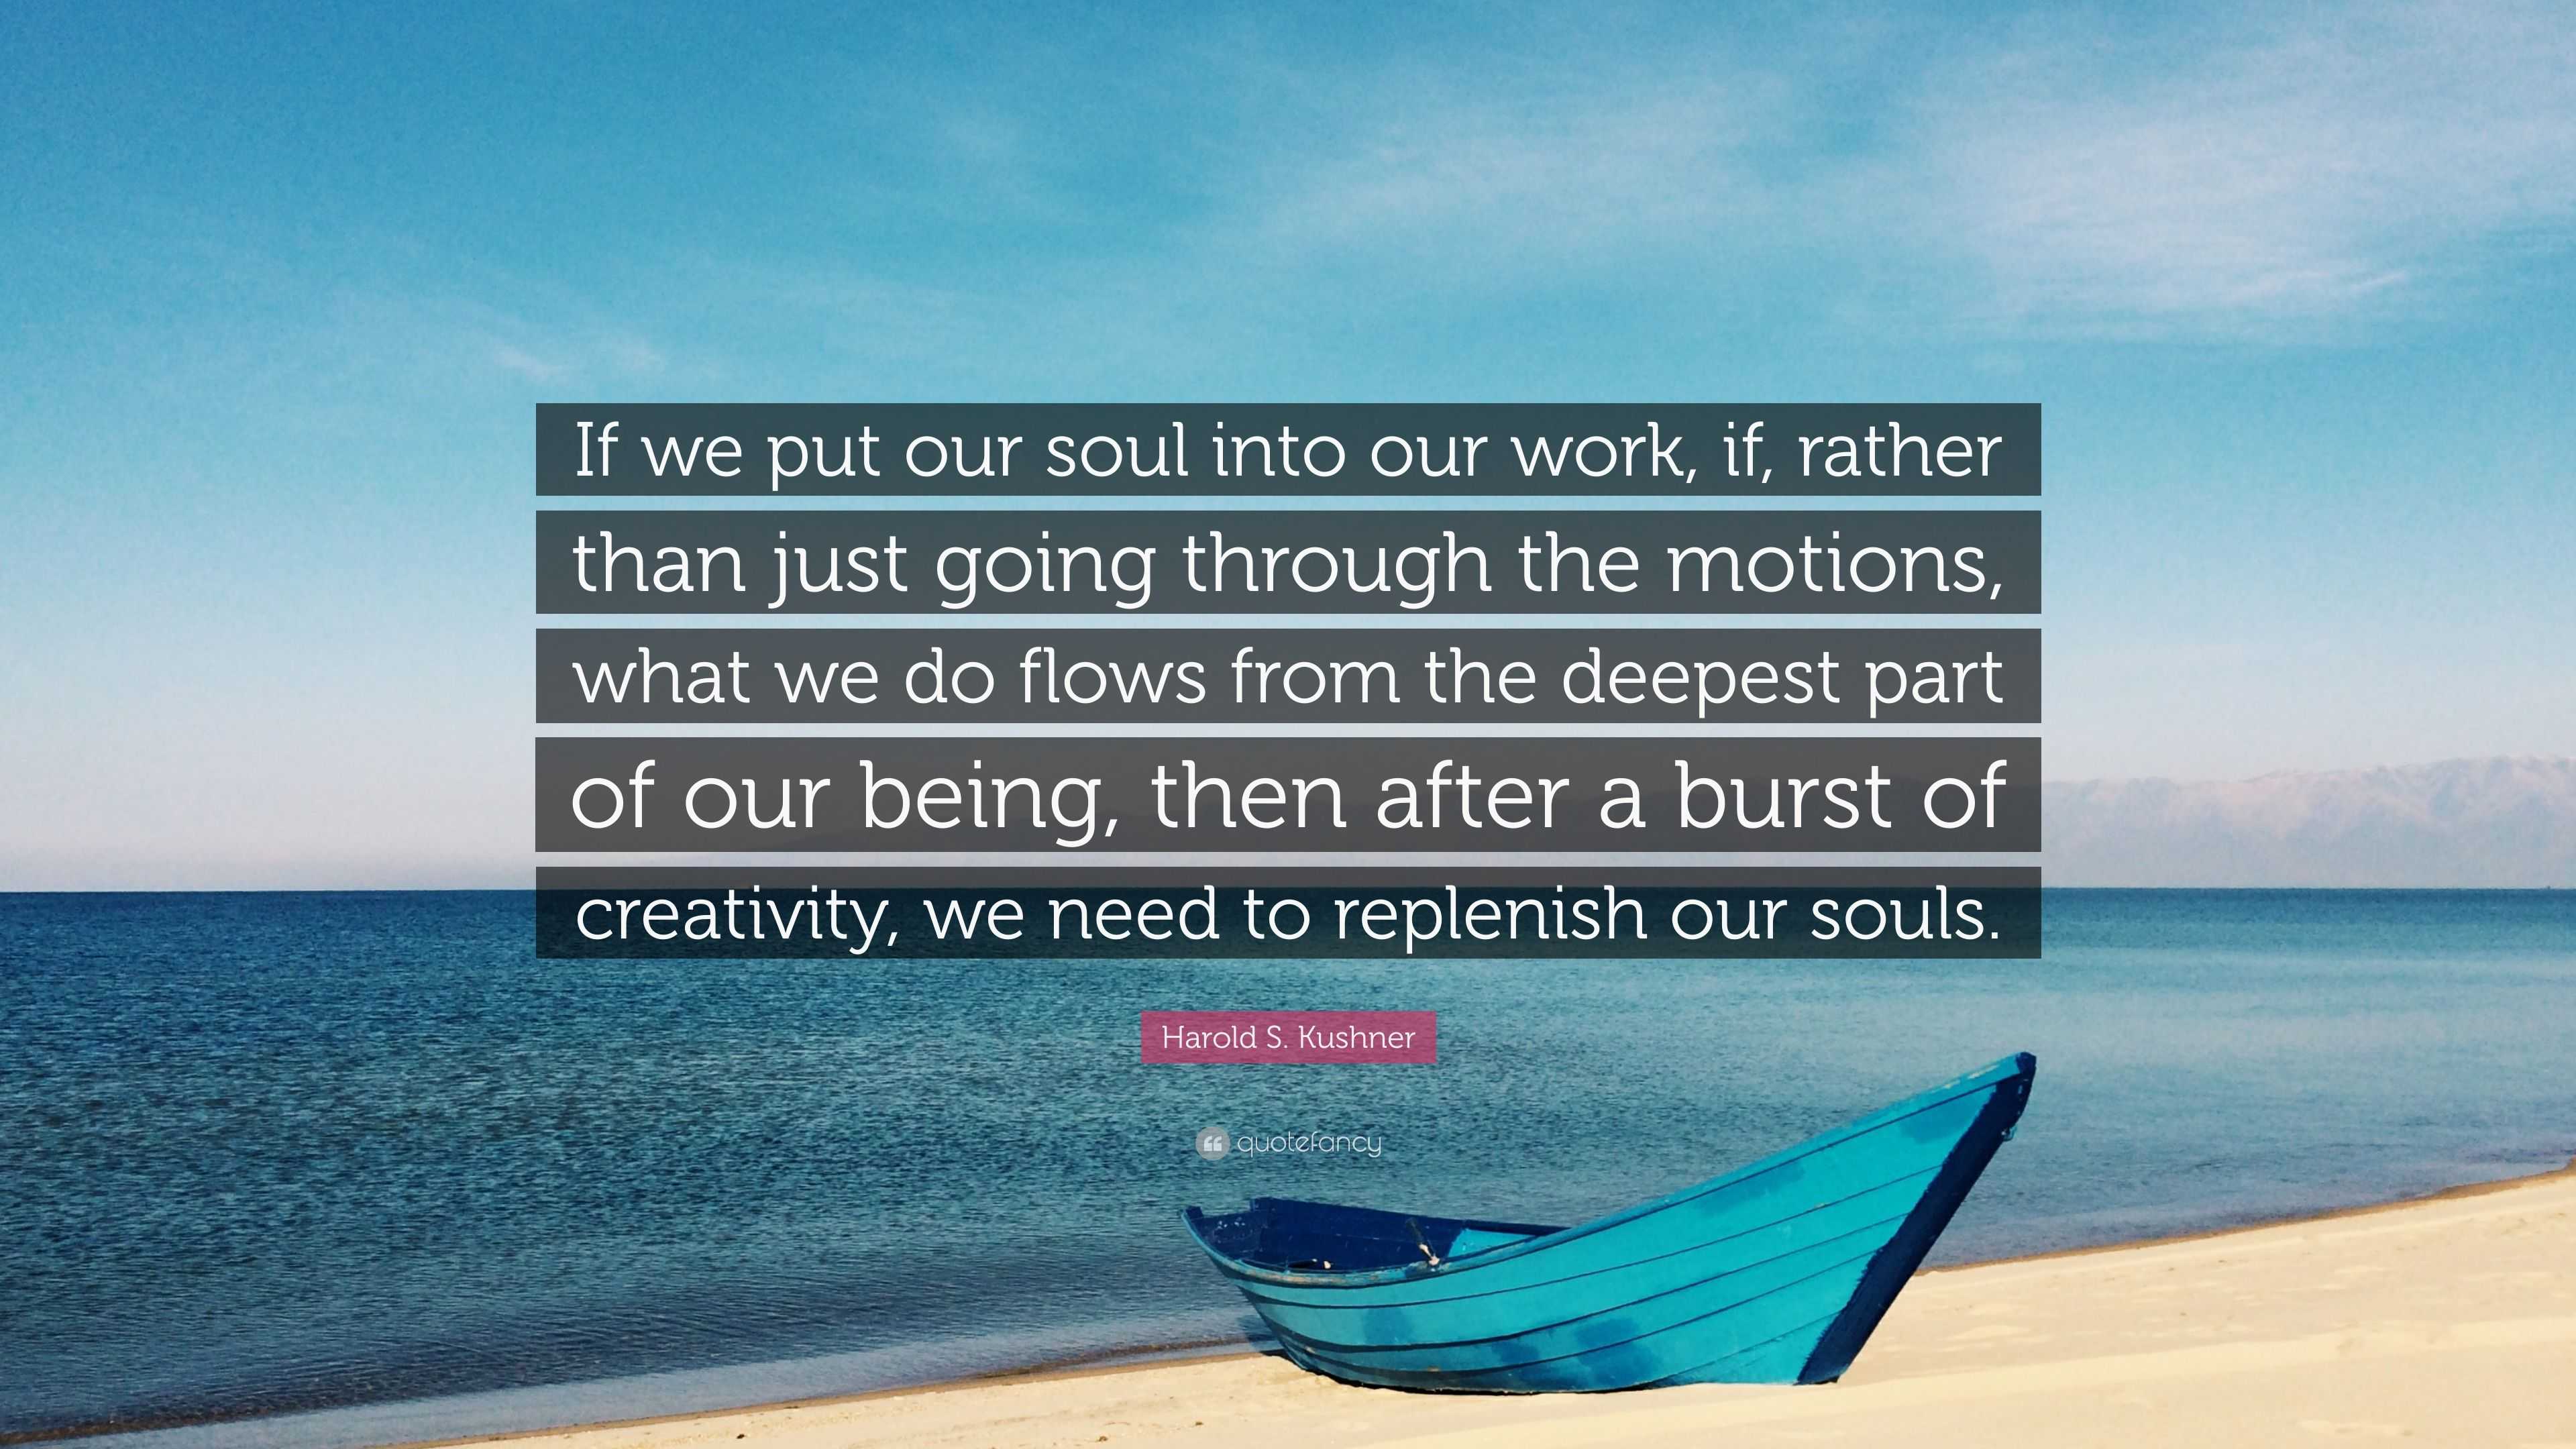 Harold S Kushner Quote “if We Put Our Soul Into Our Work If Rather Than Just Going Through